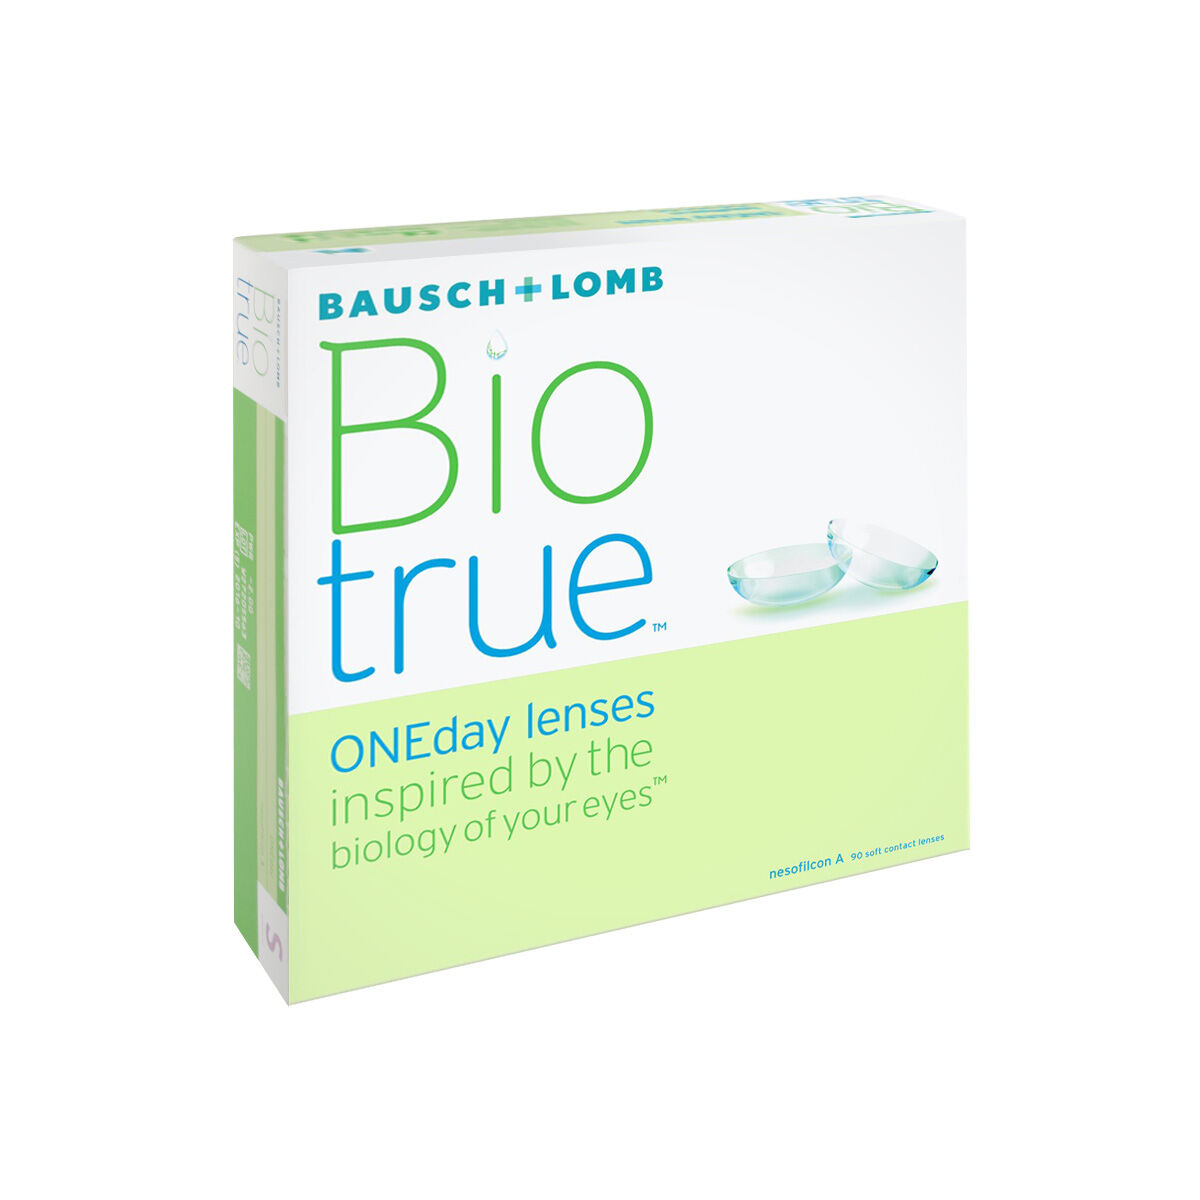 Bausch & Lomb Biotrue One Day (90 Contact Lenses), Bausch & Lomb, Daily Disposables, Nesofilcon A